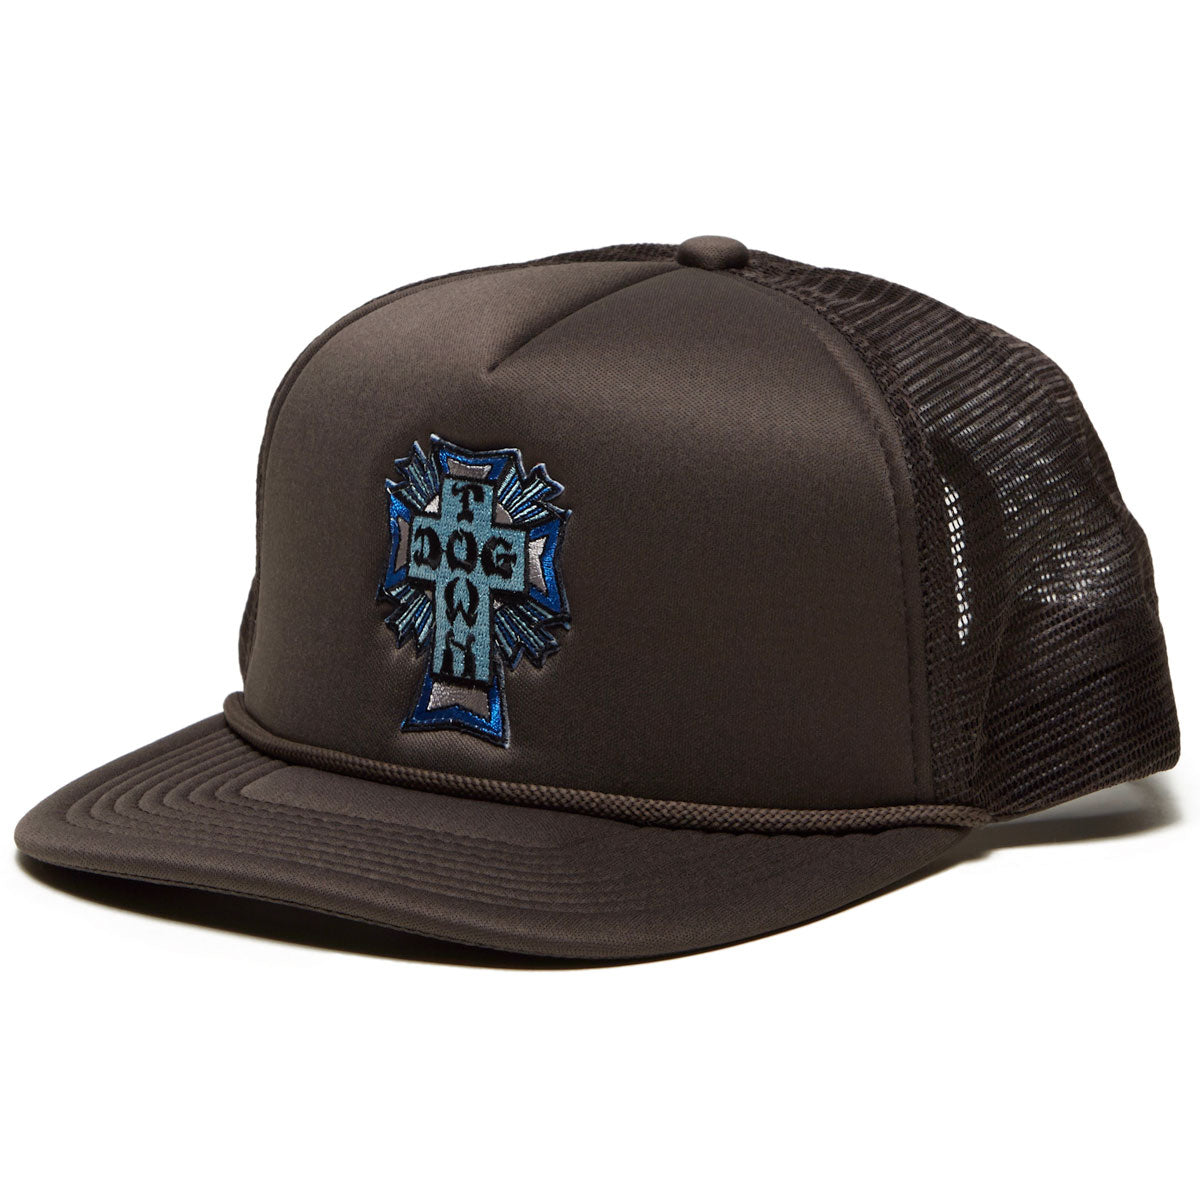 Dogtown Blue Cross Patch Mesh Hat - Charcoal Grey image 1